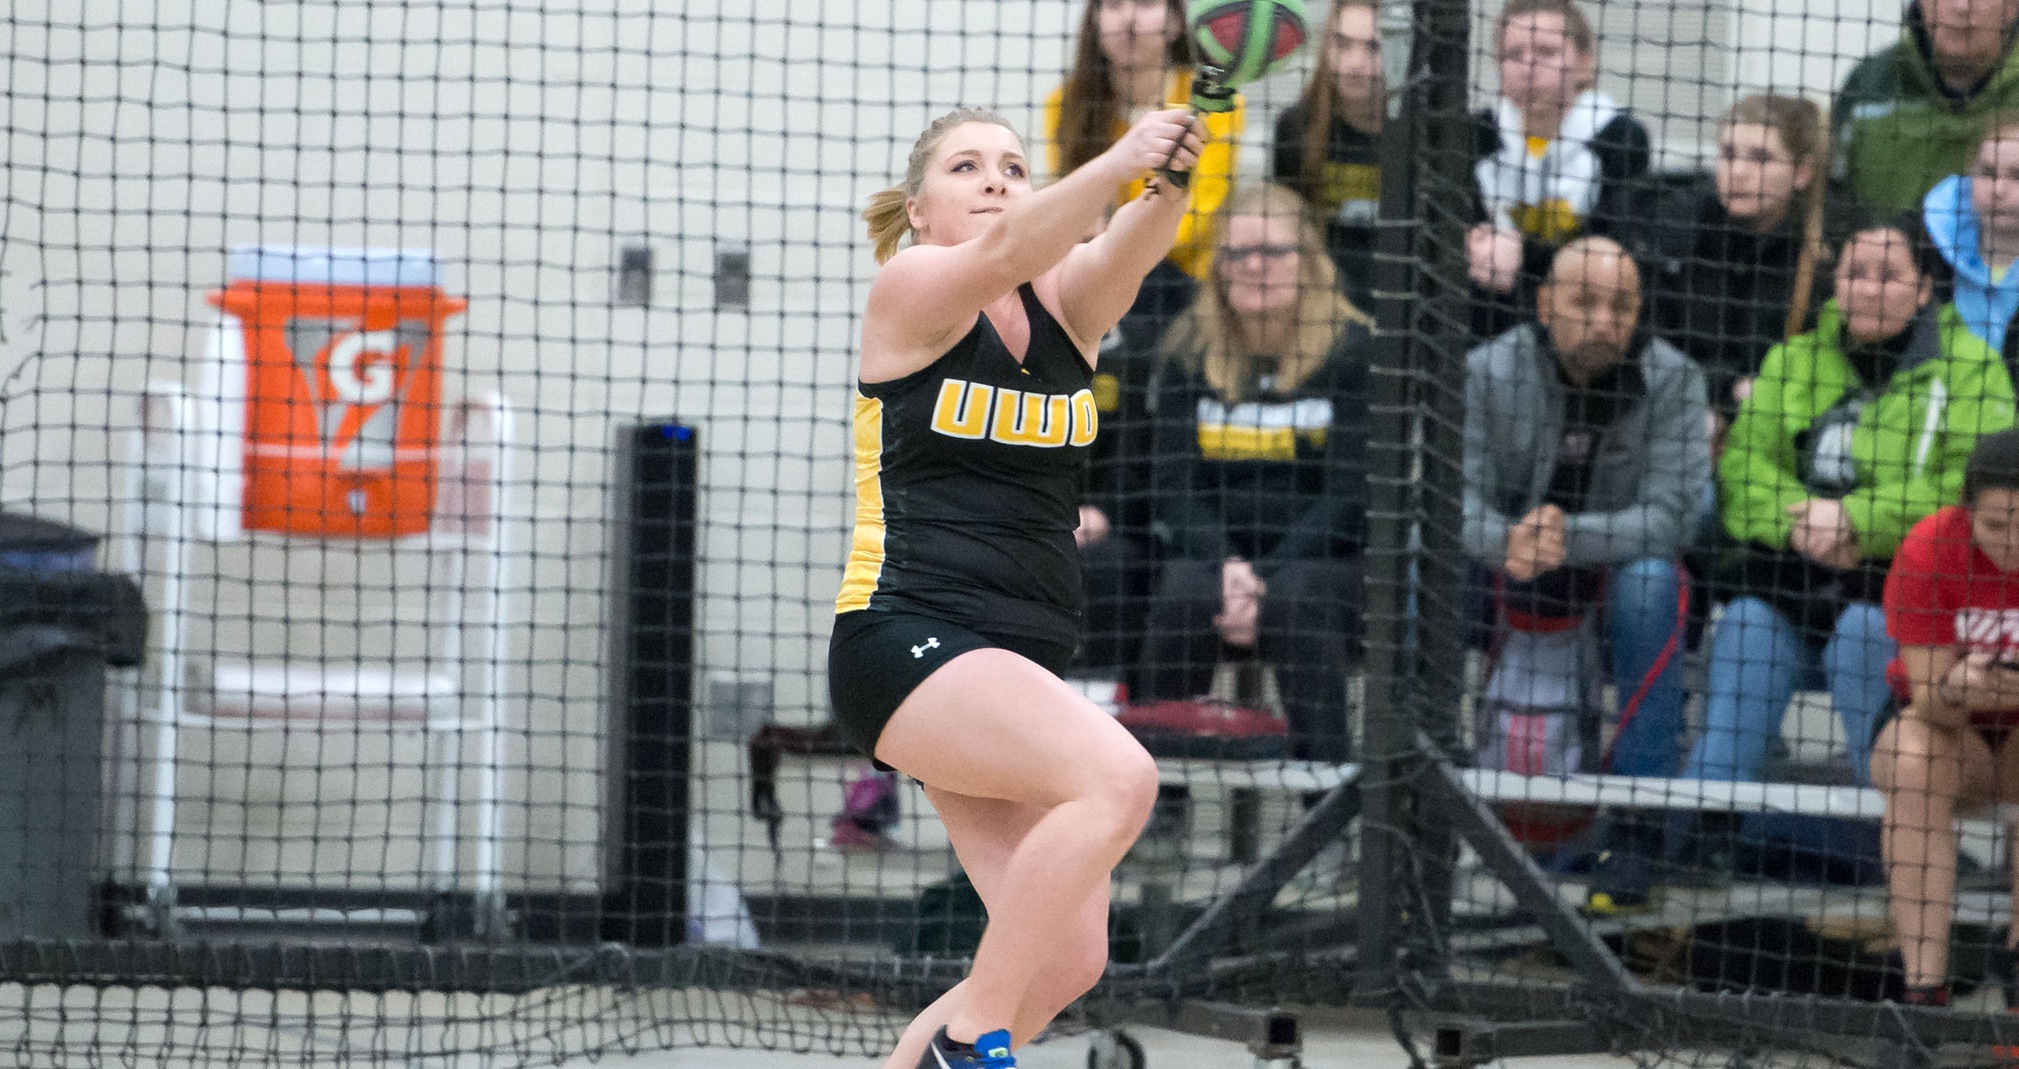 Ellie Infante placed second in the weight throw.